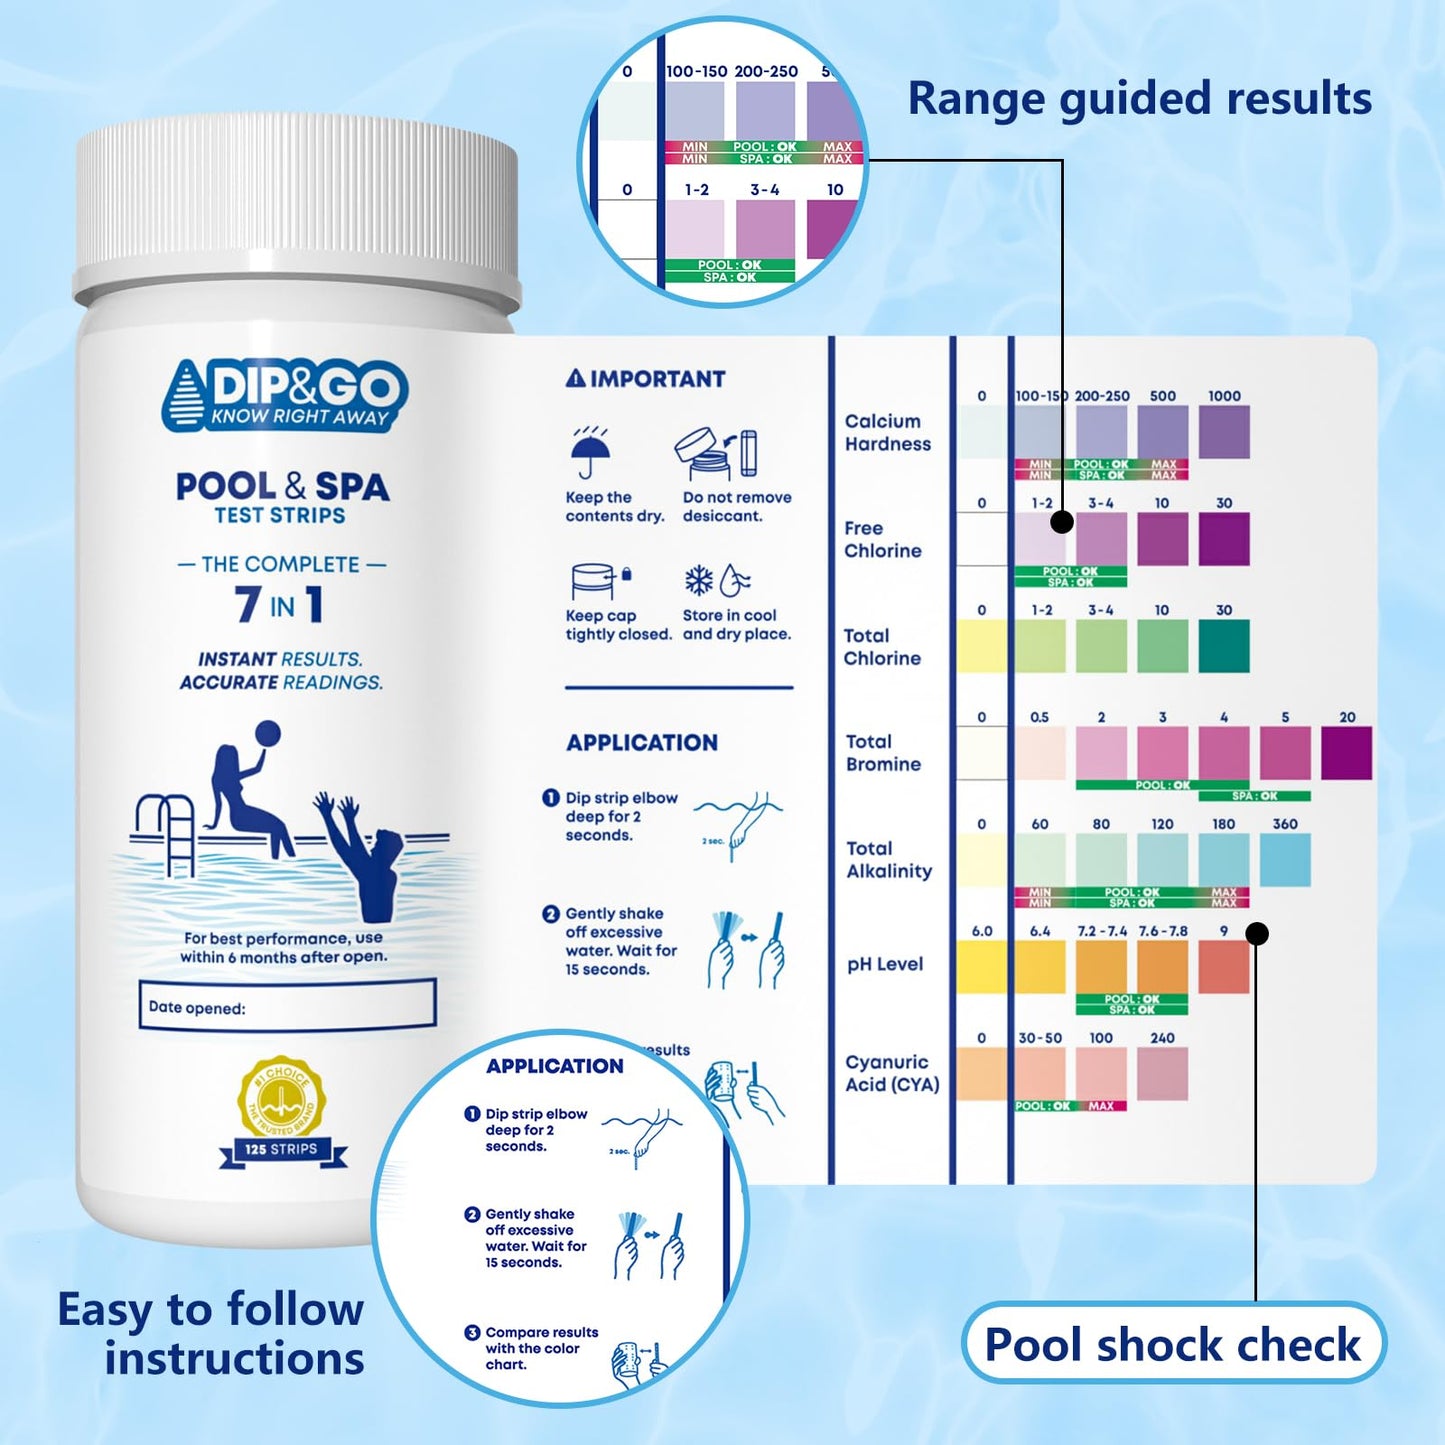 7 in 1 Pool and Spa Test Strips - 125 Strips Pool and Hot Tub Test Kit for pH, Total Chlorine, Total Alkalinity, Hardness, Free Chlorine, Bromine, Cyanurlc Acid